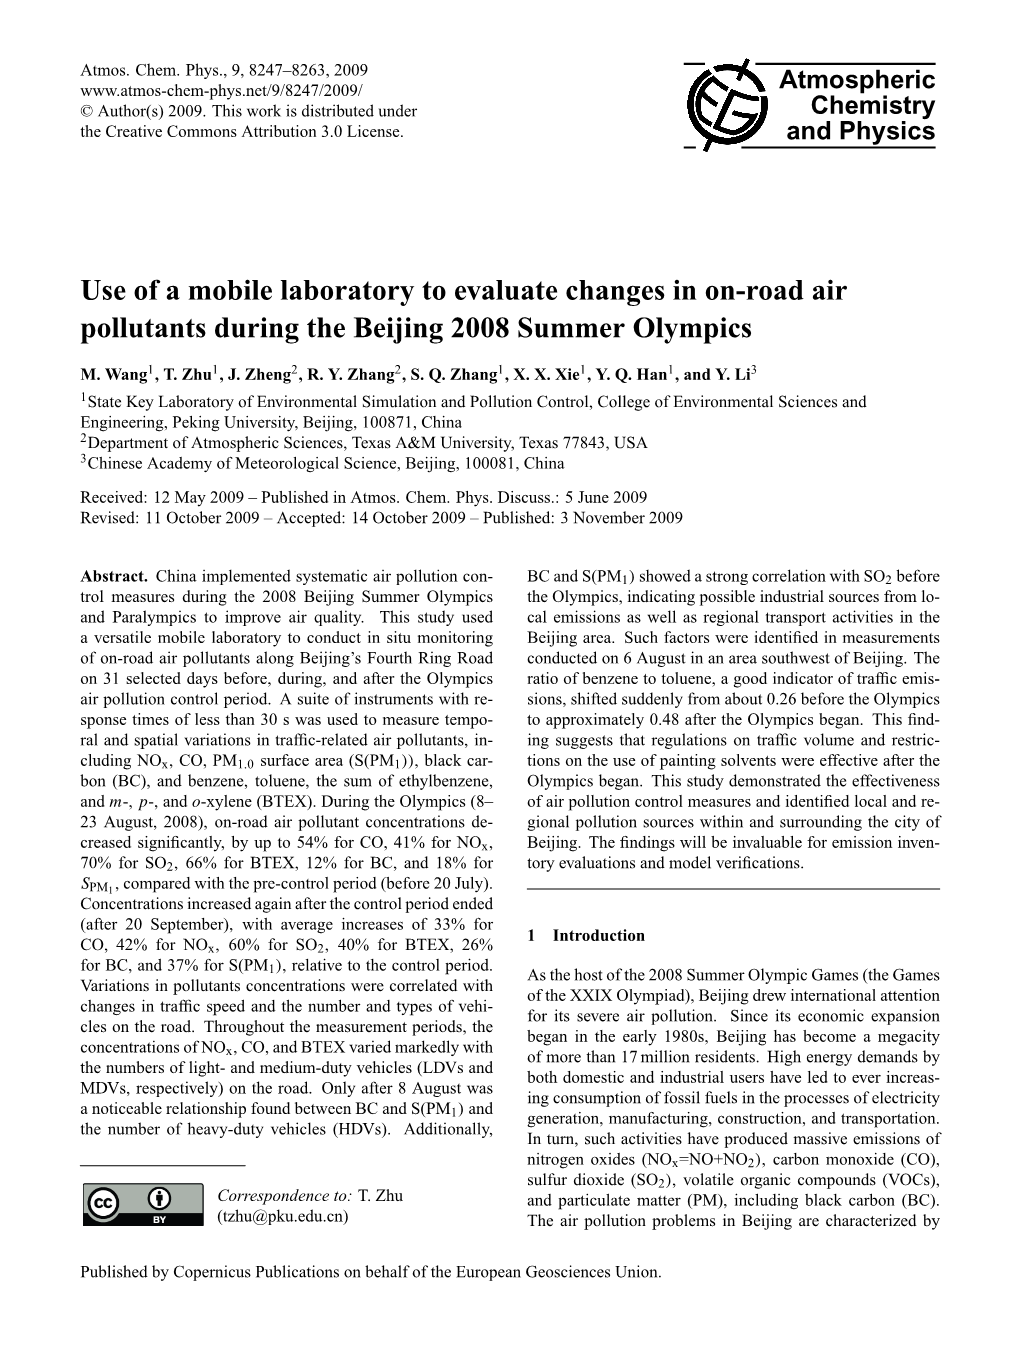 Use of a Mobile Laboratory to Evaluate Changes in On-Road Air Pollutants During the Beijing 2008 Summer Olympics